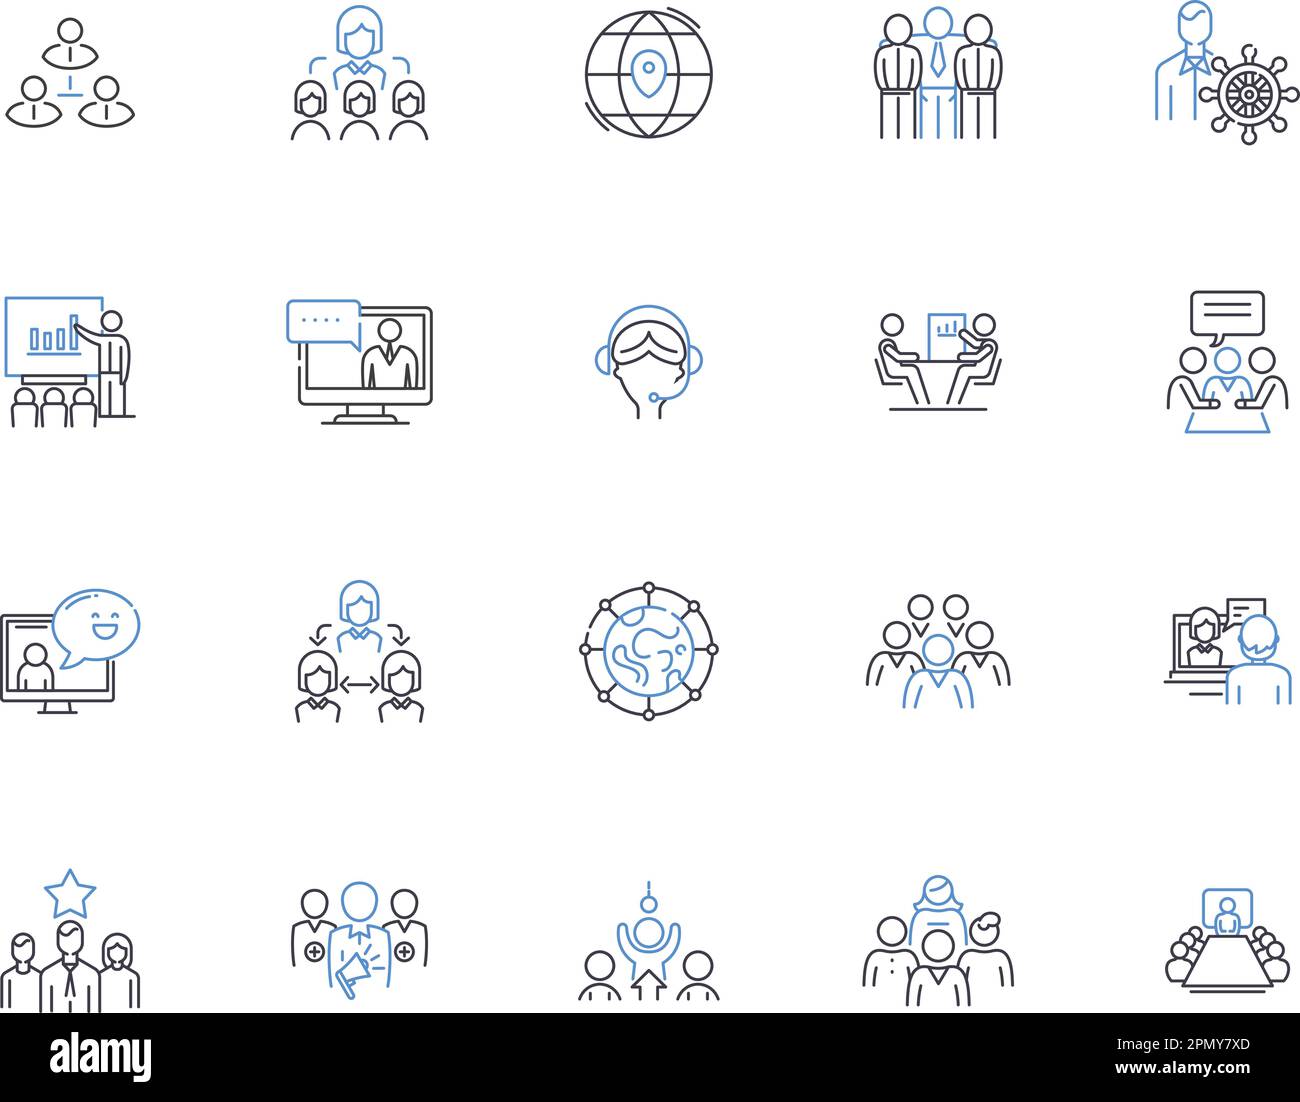 Public relations agency outline icons collection. Public, Relations, Agency, PR, PR Agency, Communications, Branding vector and illustration concept Stock Vector